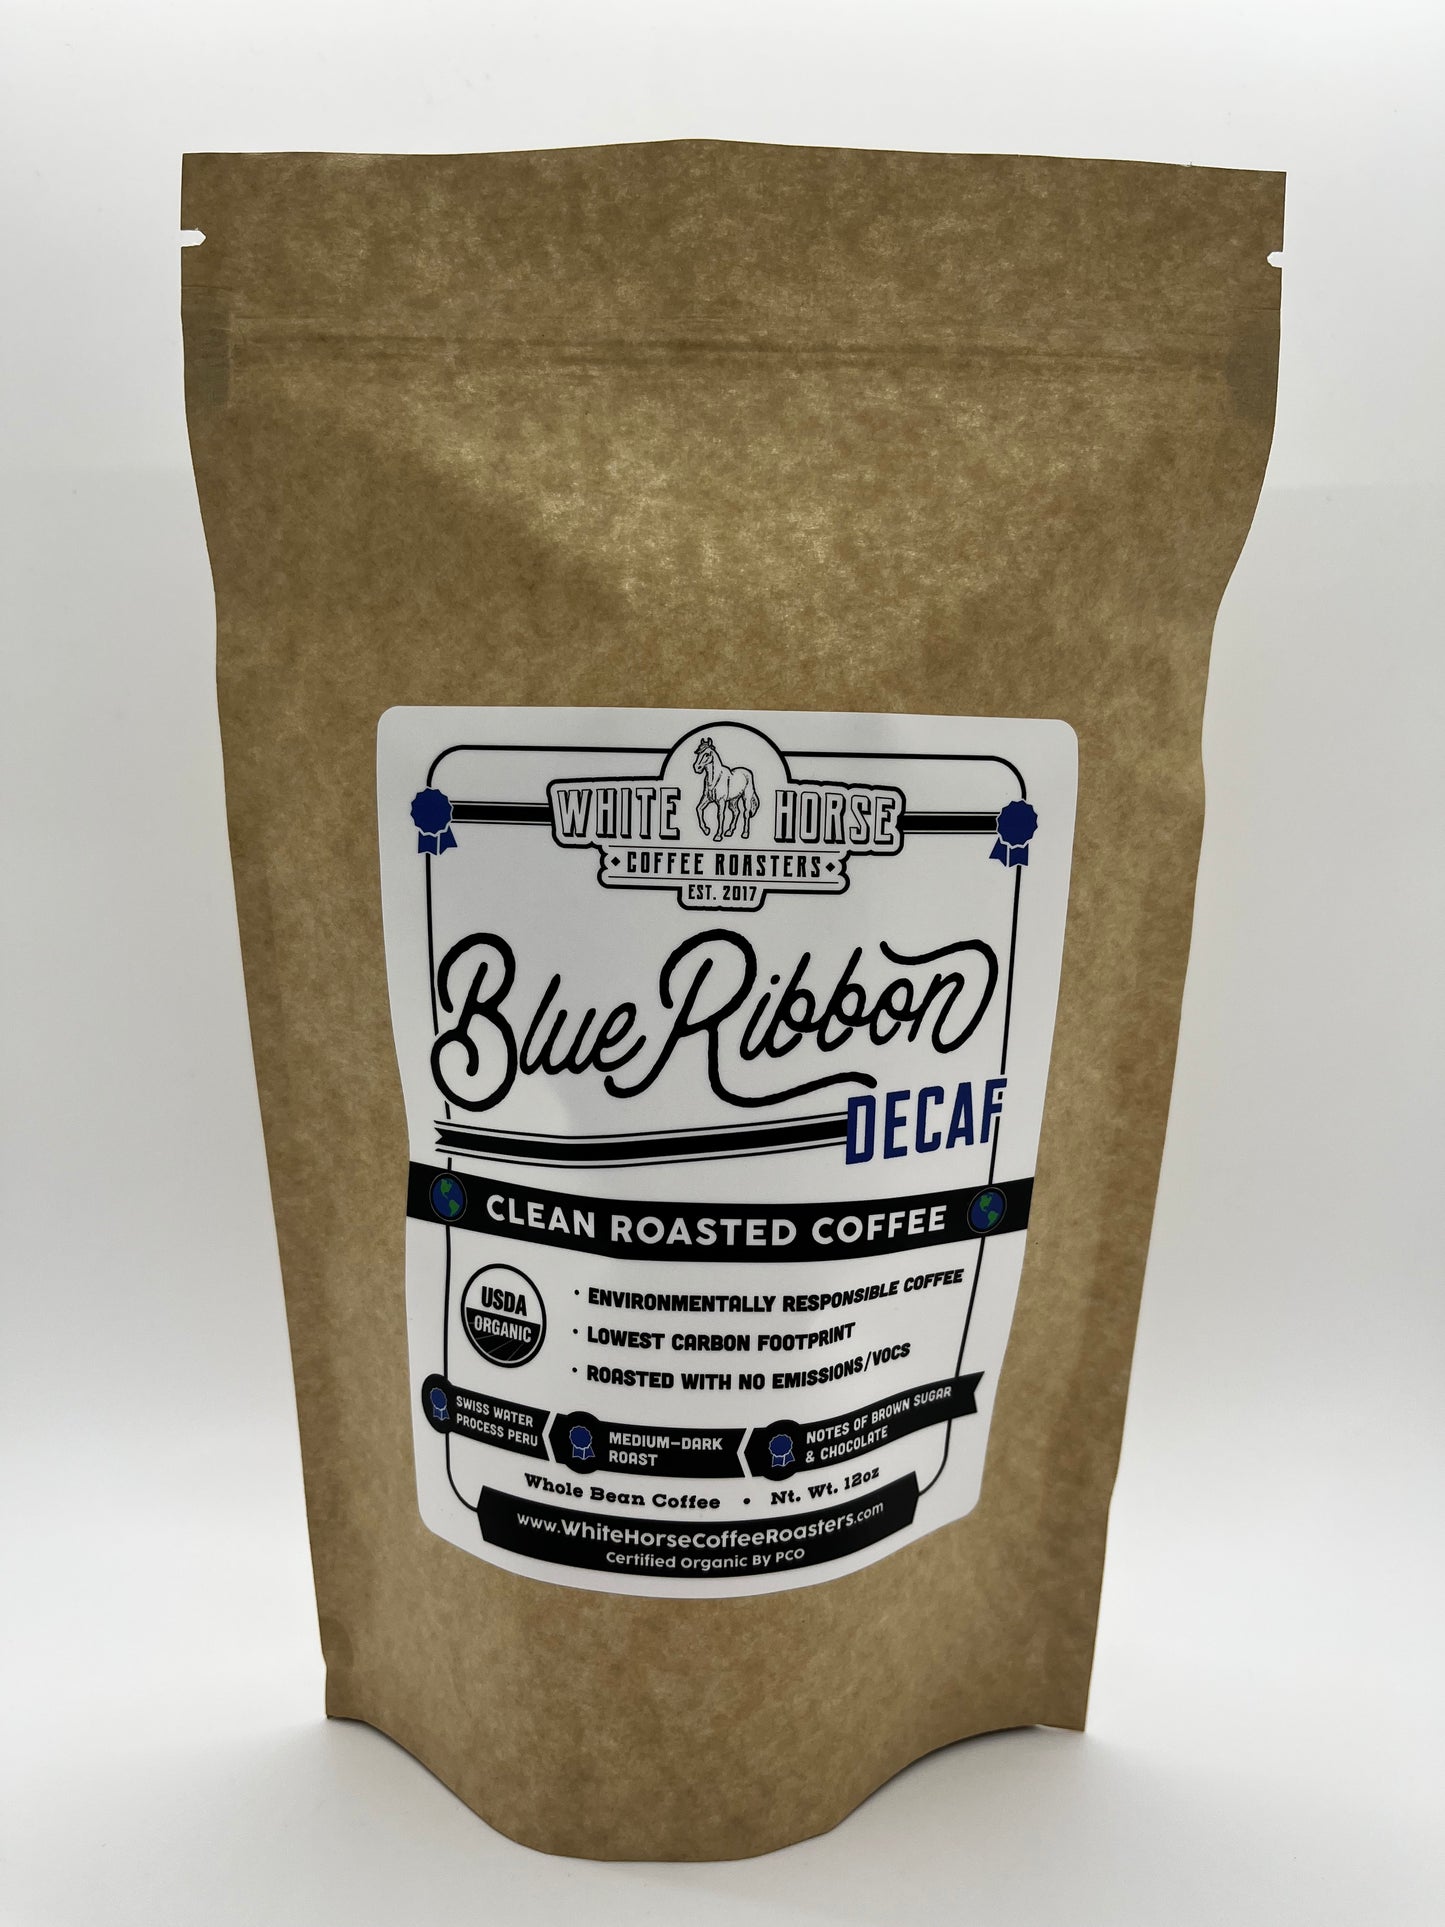 Blue Ribbon Decaf Gourmet - Indulge in the luxury of coffee cafe franchise quality with each sip, brought to you by White Horse Coffee Roasters.